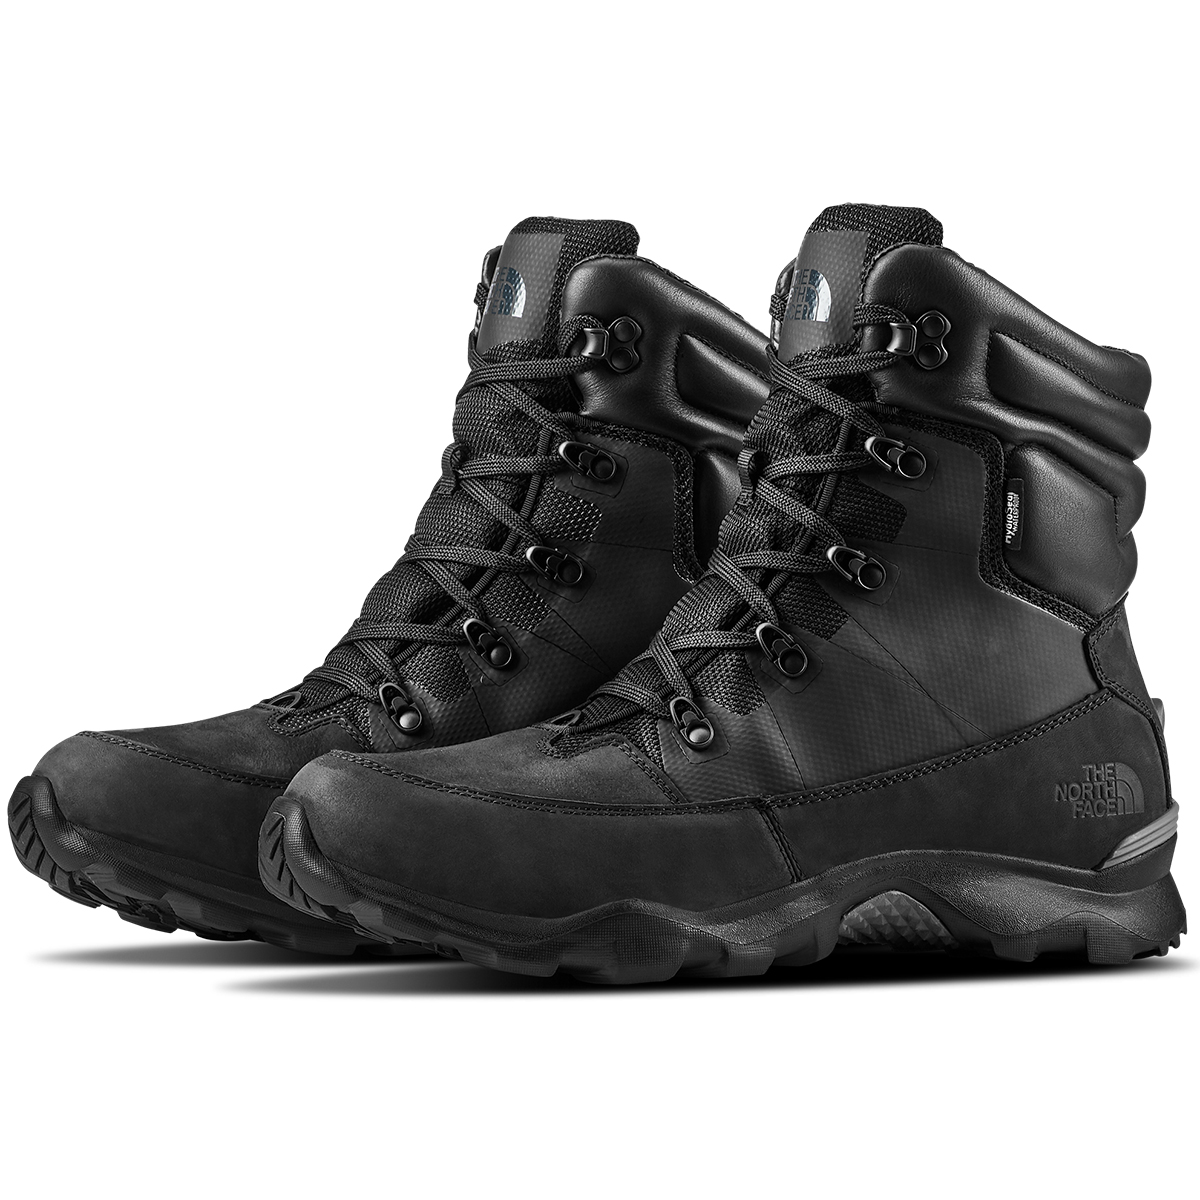 The North Face MEN’S THERMOBALL™ LIFTY 400 WINTER BOOTS NF0A331A The North Face ktmart 0